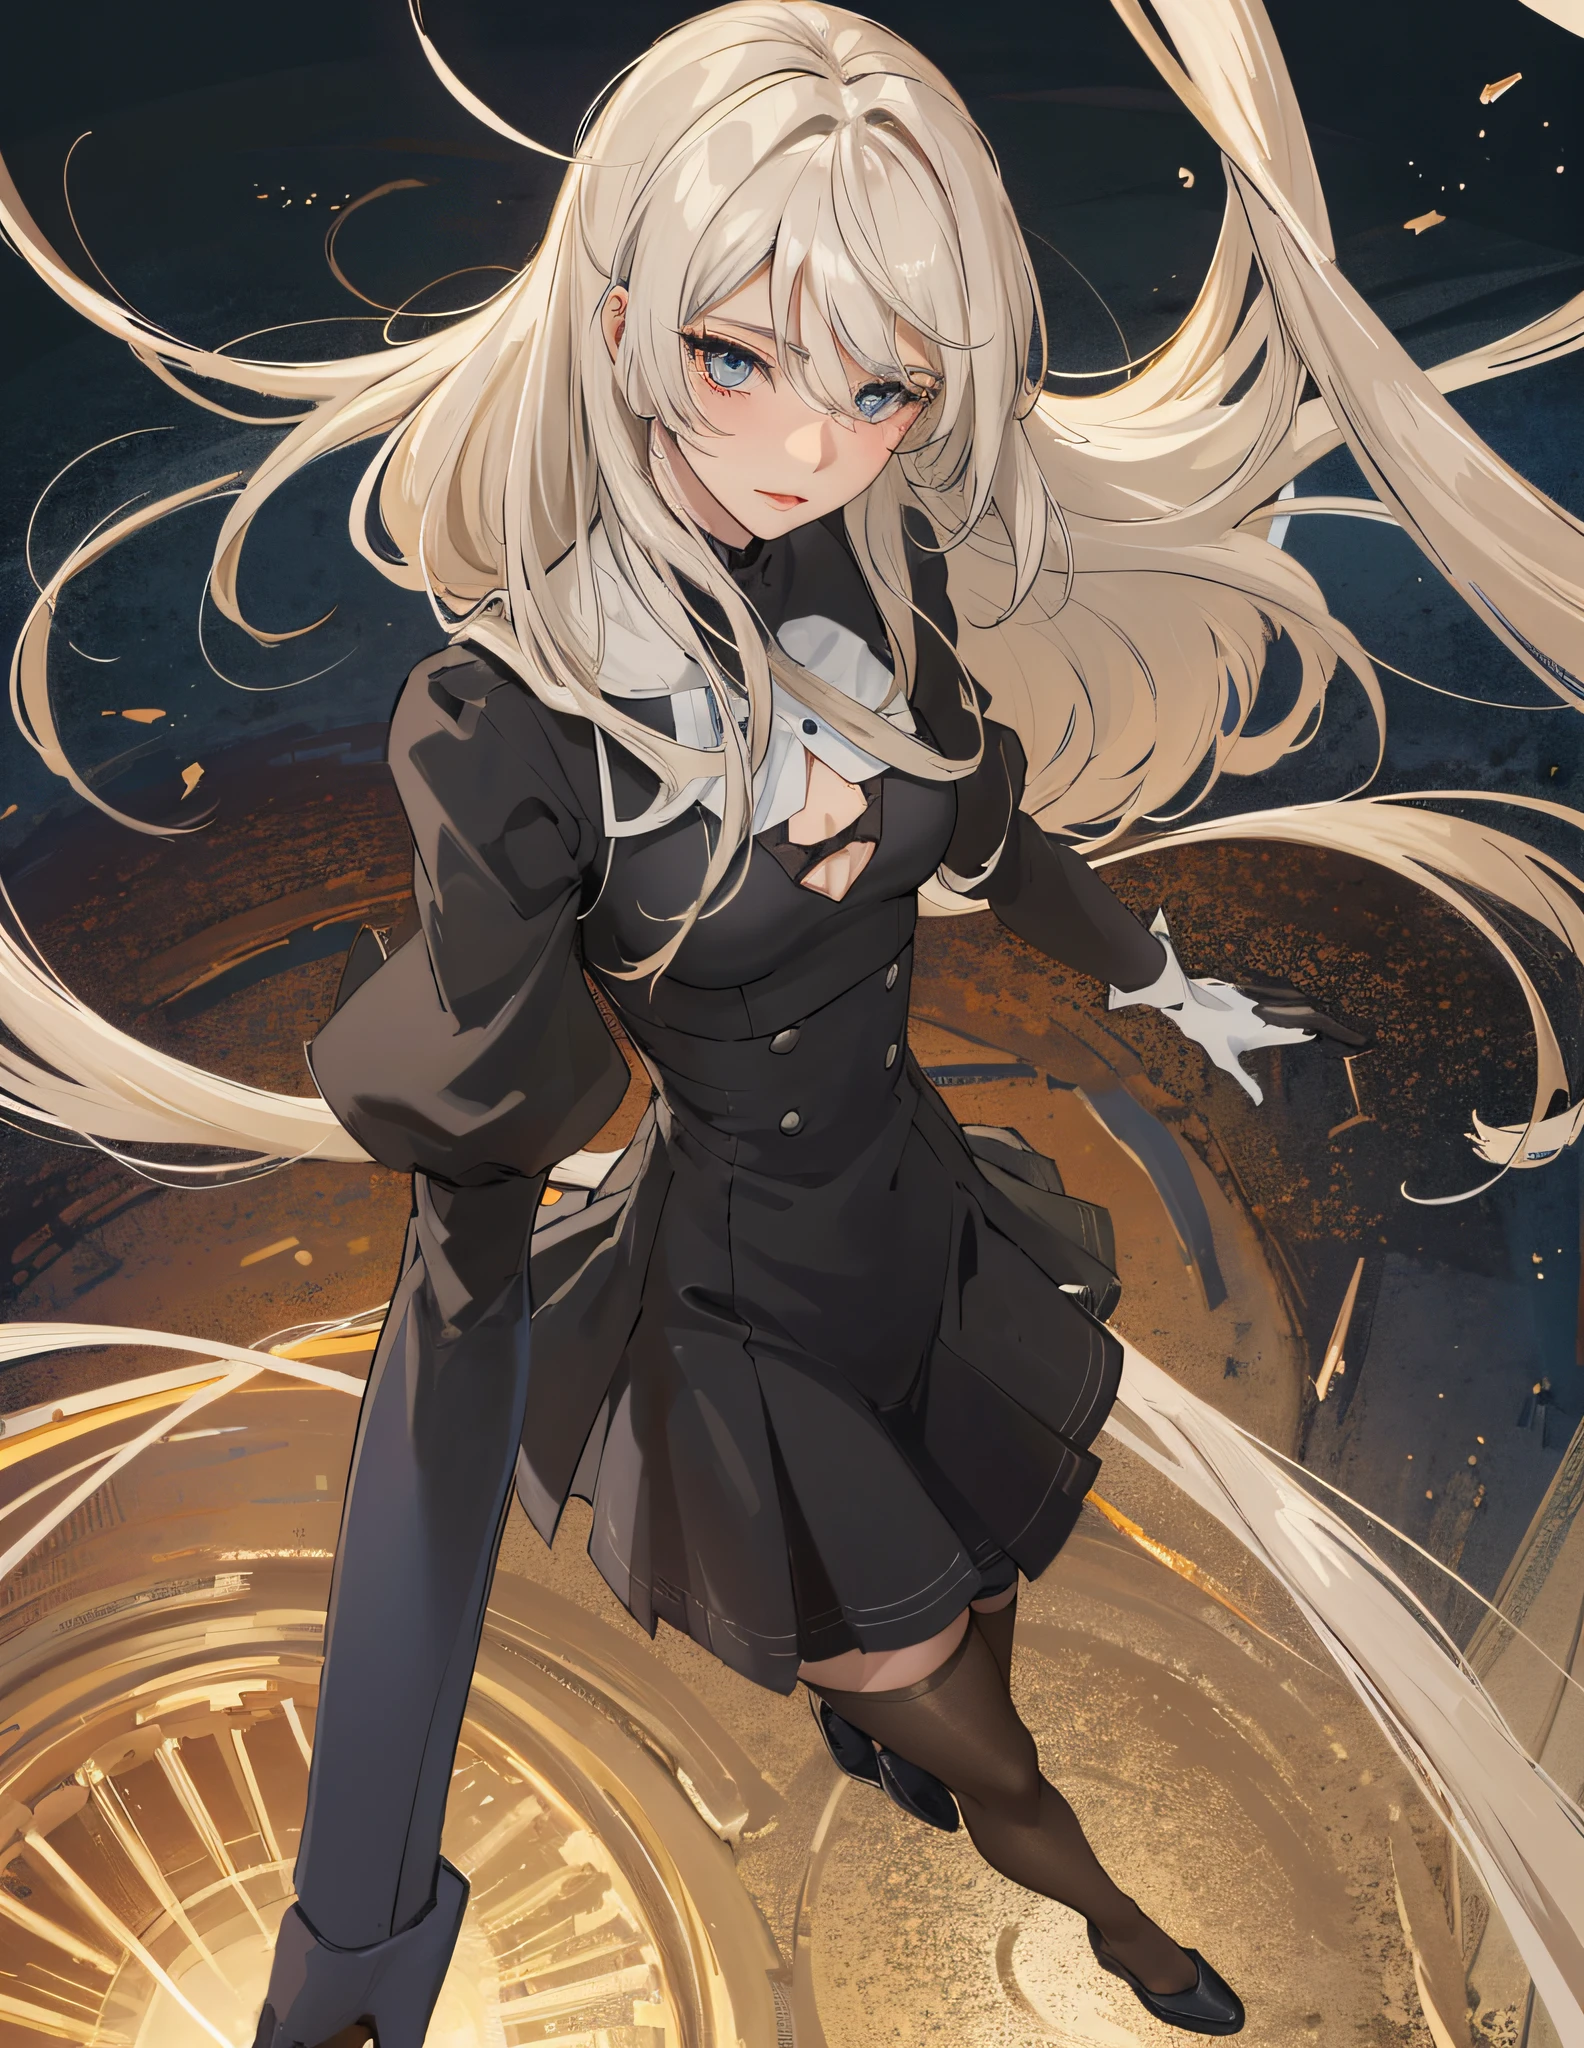 (Best quality at best,4K,A high resolution),actual,sportrait:1.2,Girl with silver hair,Red pupils glow,glowing light eyes,black uniforms,pleatedskirt,legs long,lips parted,Be red in the face,After that,Fabulous boobs,full bodyesbian,nighttime scene,Mare,suns,rays of sunshine;Blonde hair,eBlue eyes,of gorgeous women,legs long,JK ,Perfect Golden Ratio body,cute big breasts,Black silk dress,a skirt,The shirt,long,perfect ,A little blush,blackstockings,pretty legs,beuaty girl,tender